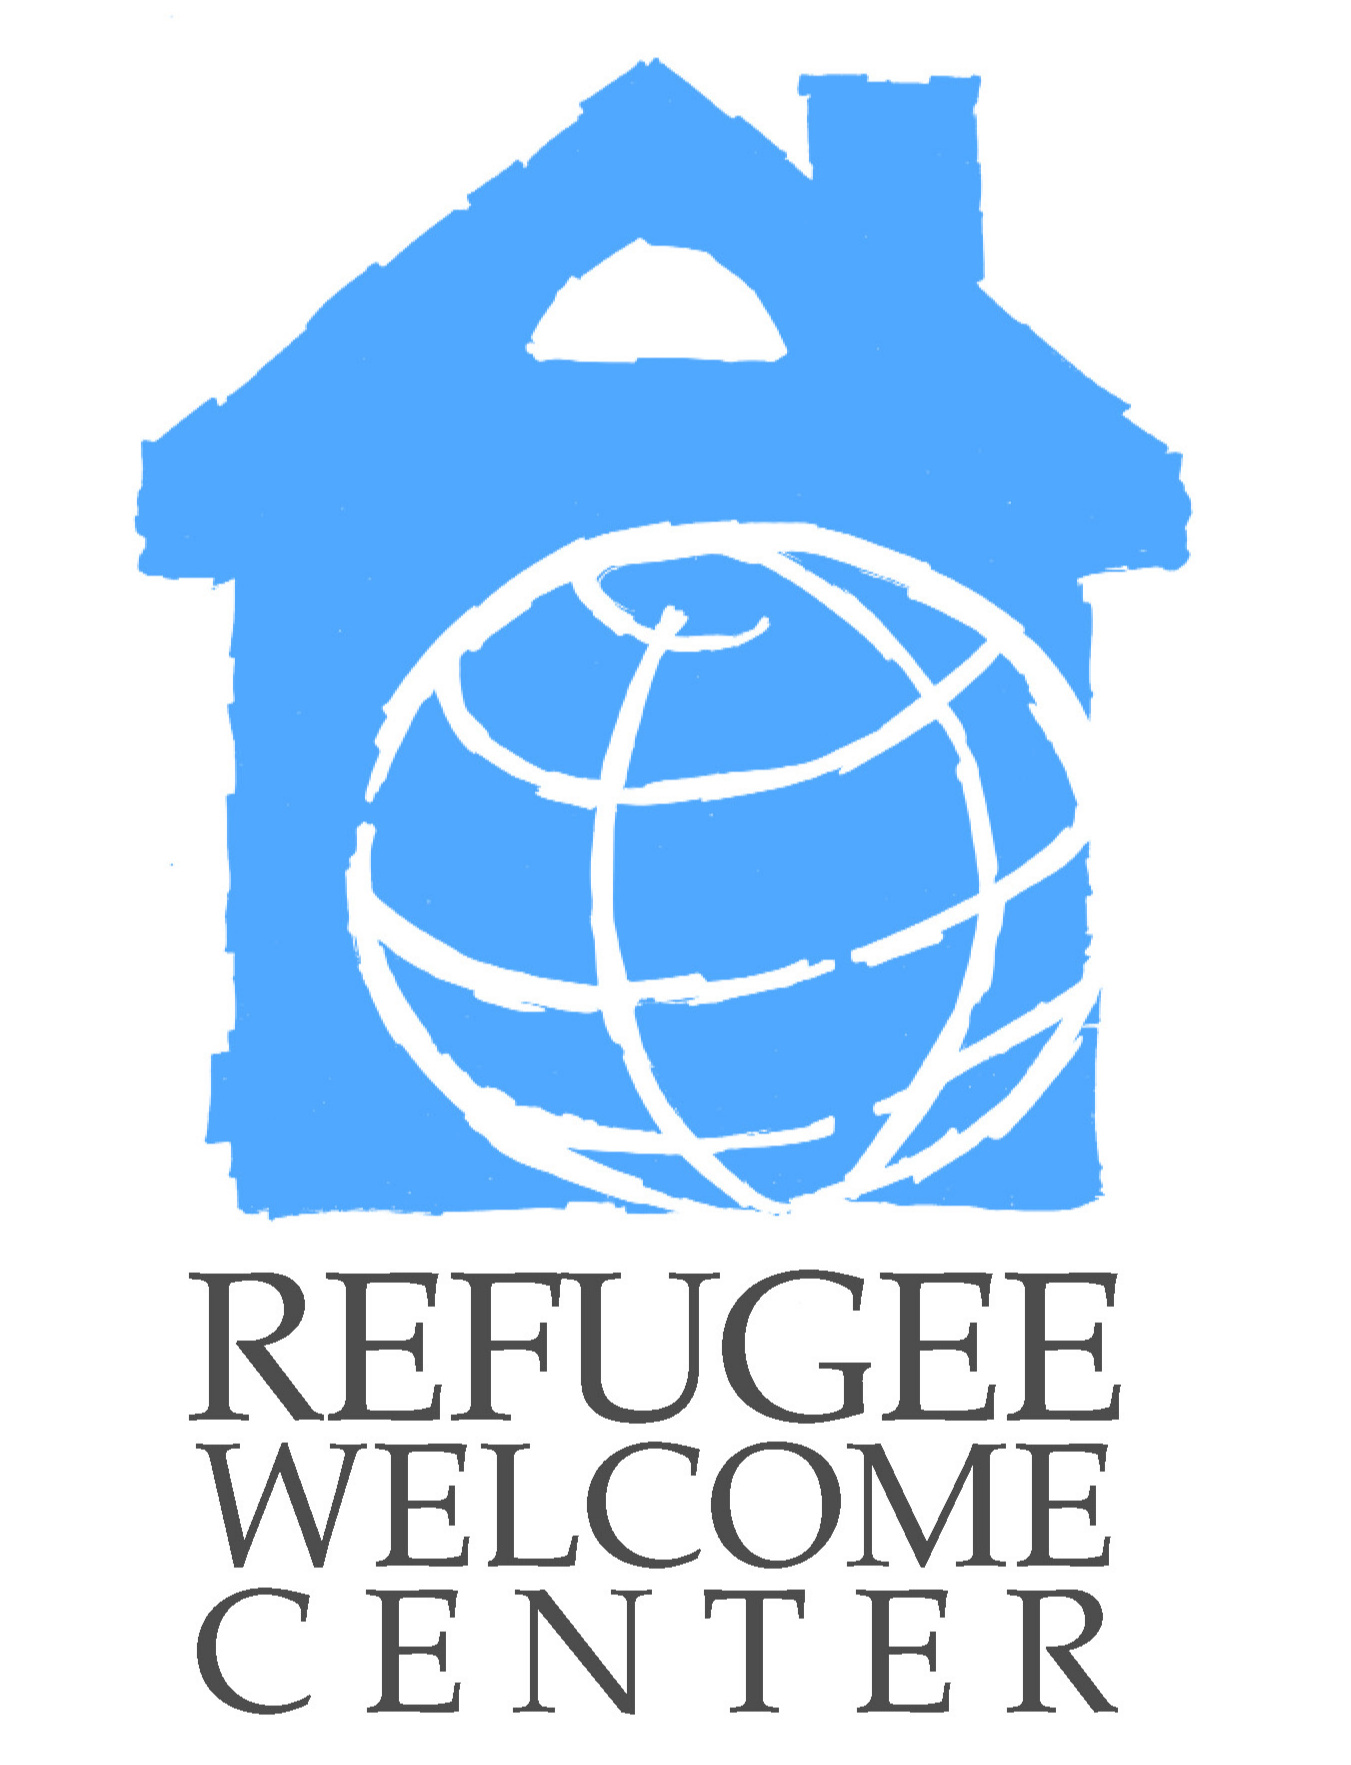 The Refugee Welcome Center